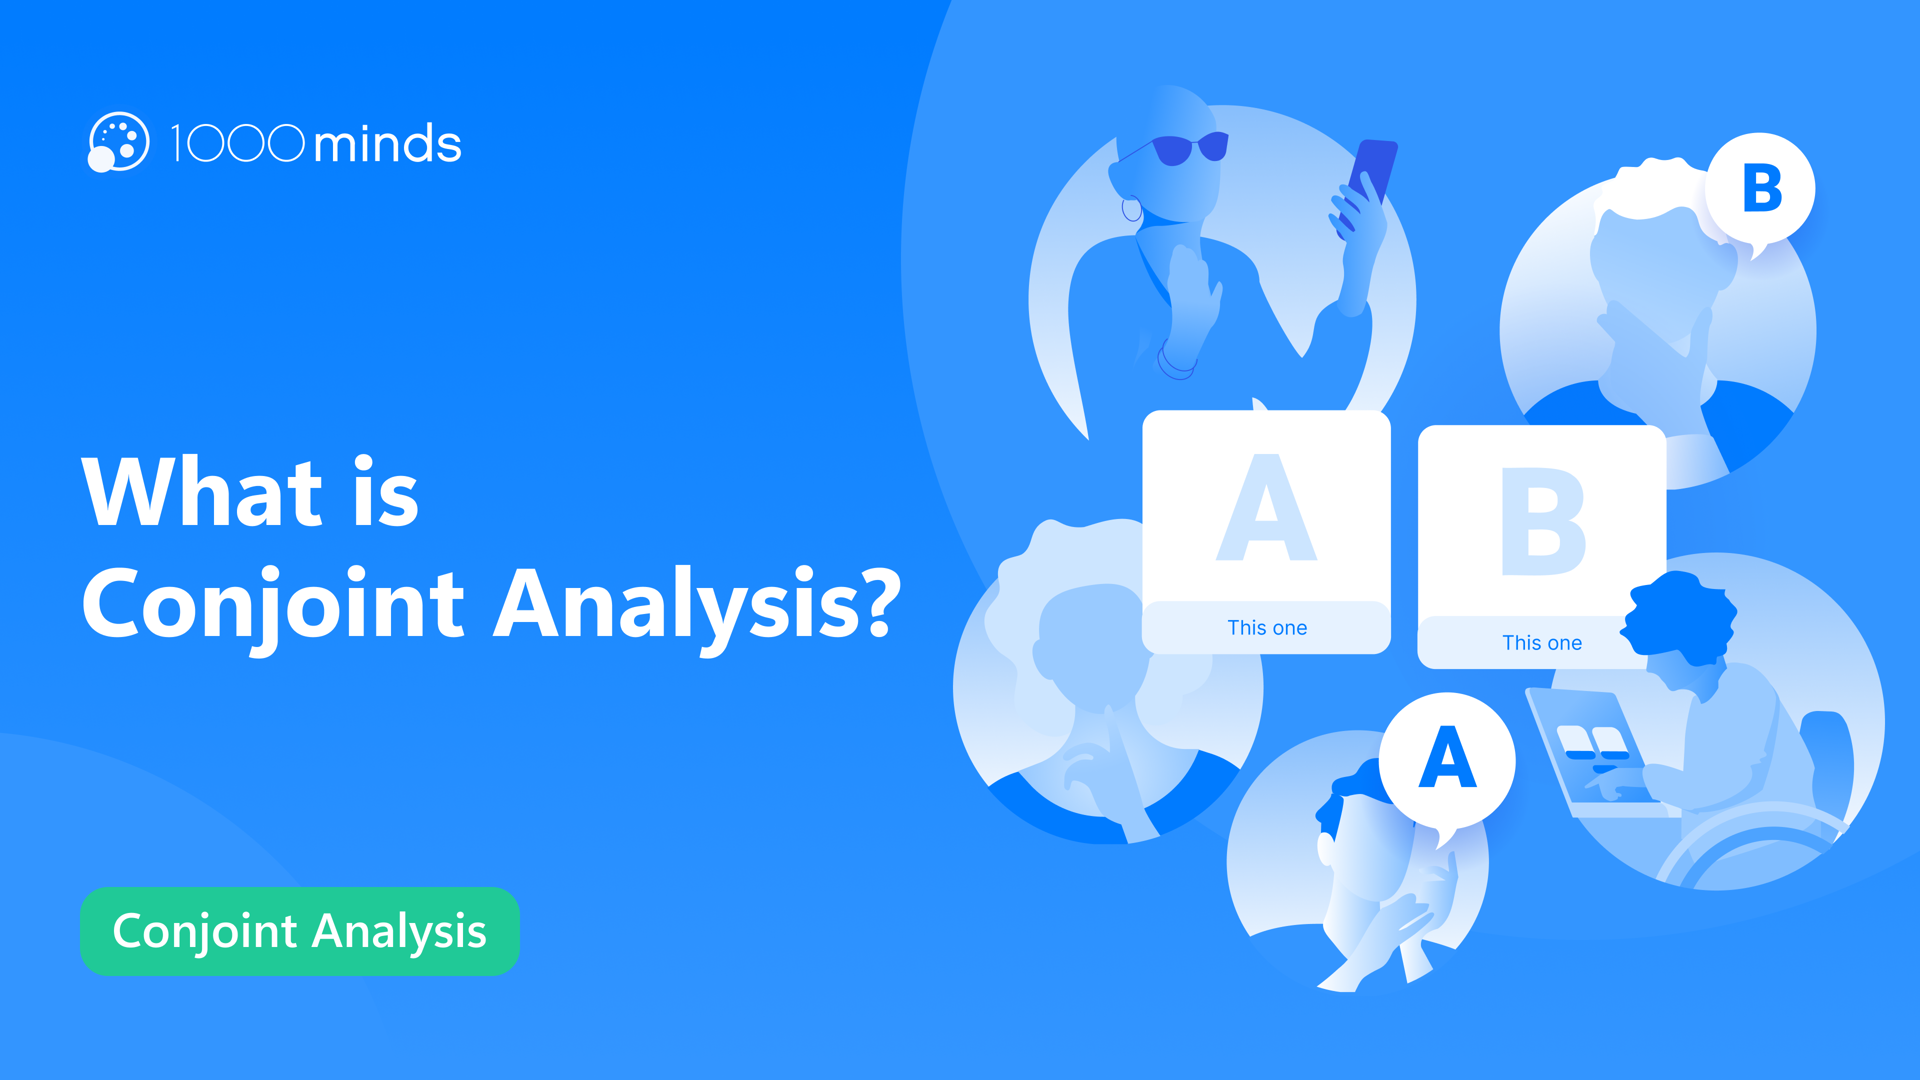 What is conjoint analysis?